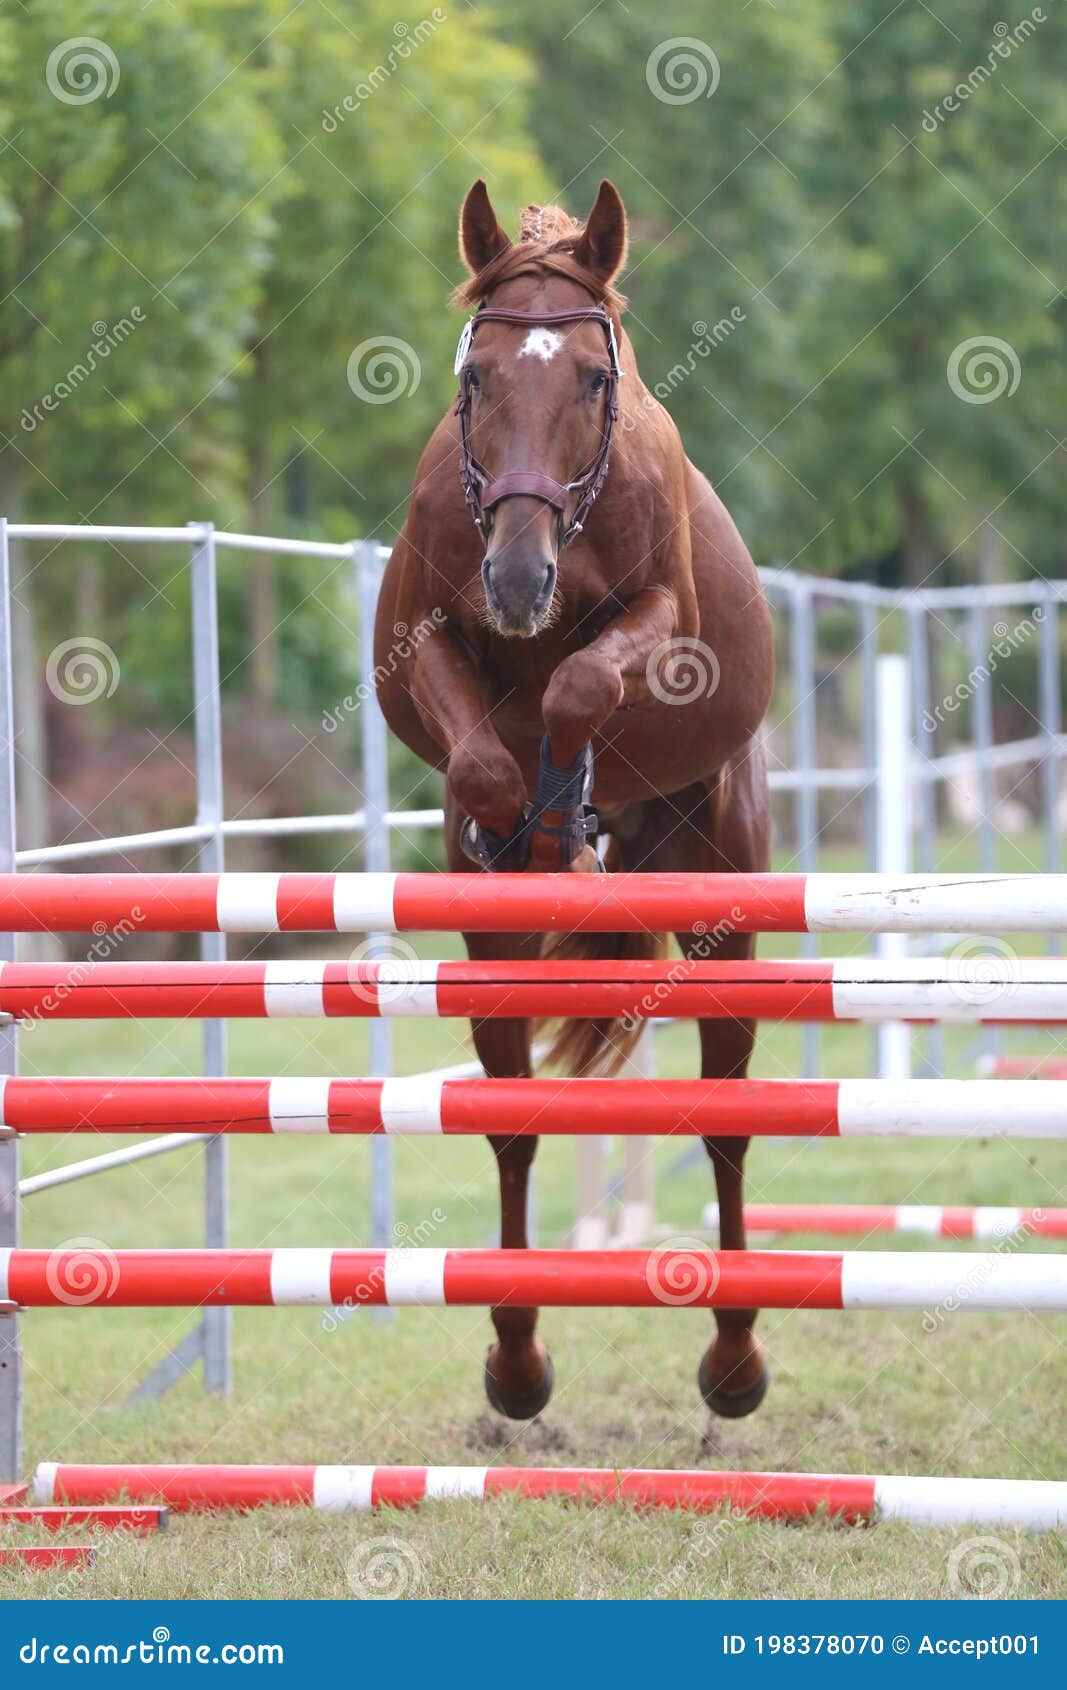 horse loose jumping on breeders event outdoors